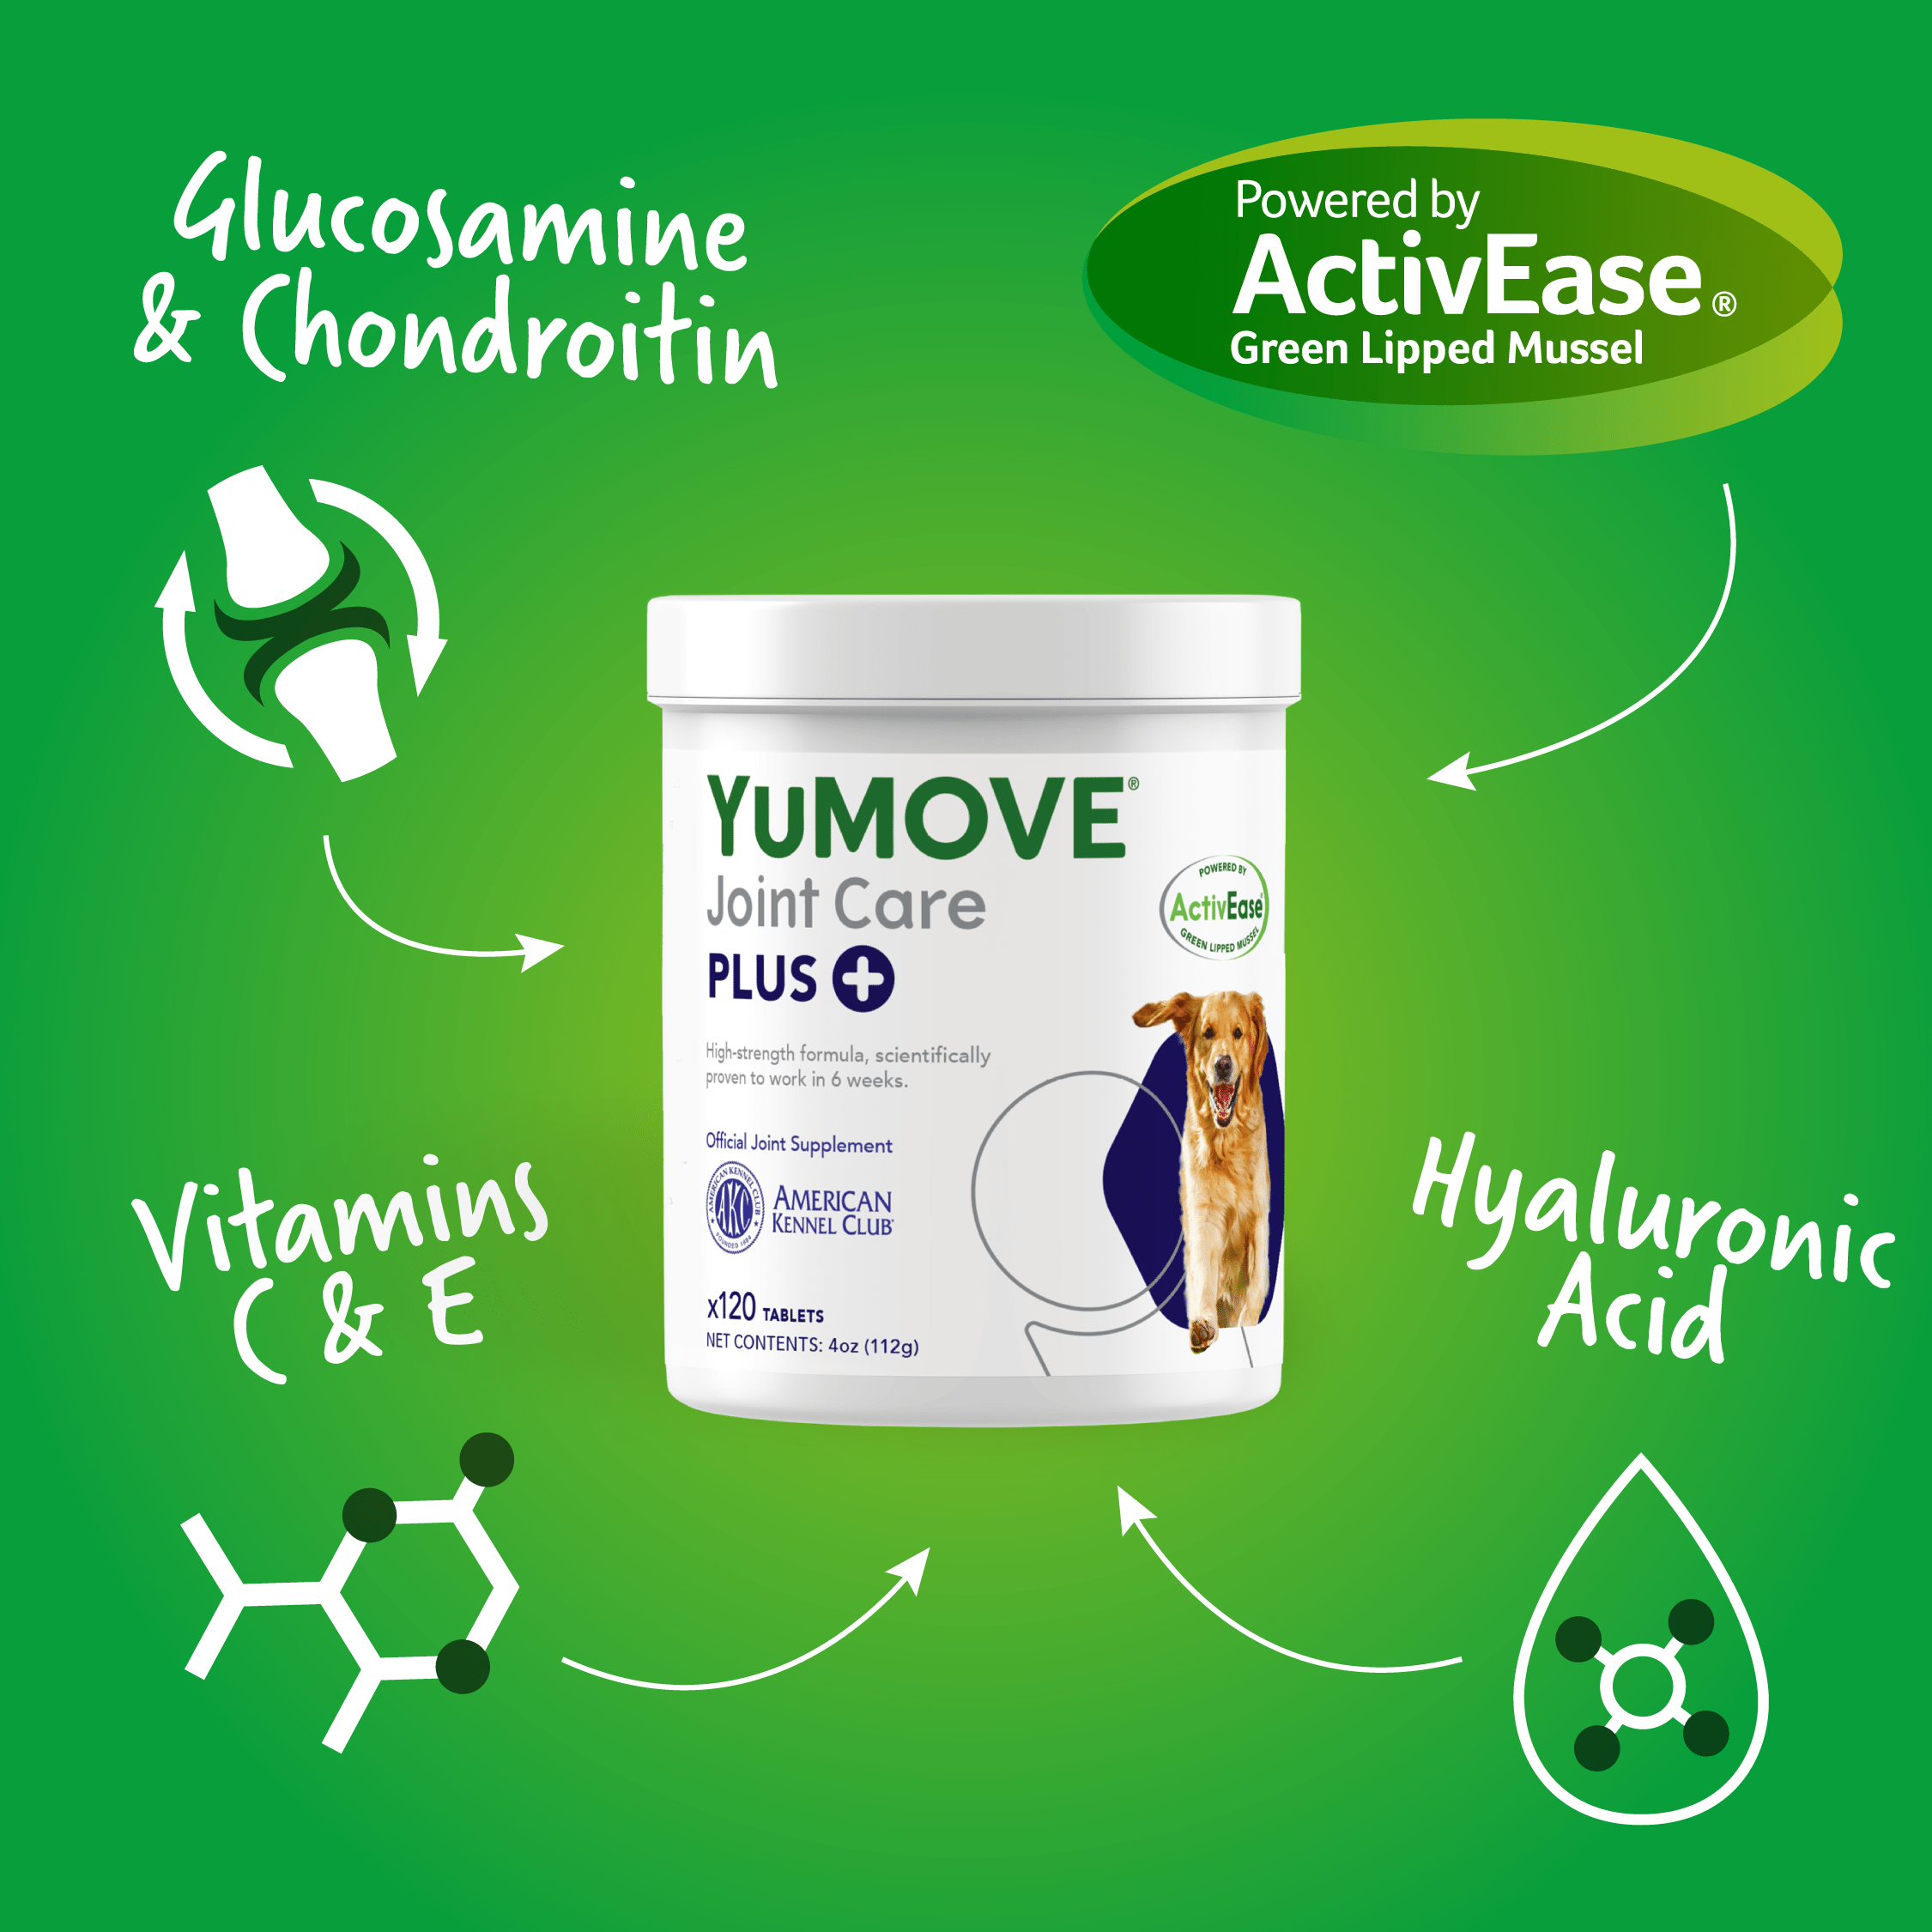 YuMOVE PLUS Joint Support Tablets Extra-Strength | Starter Pack